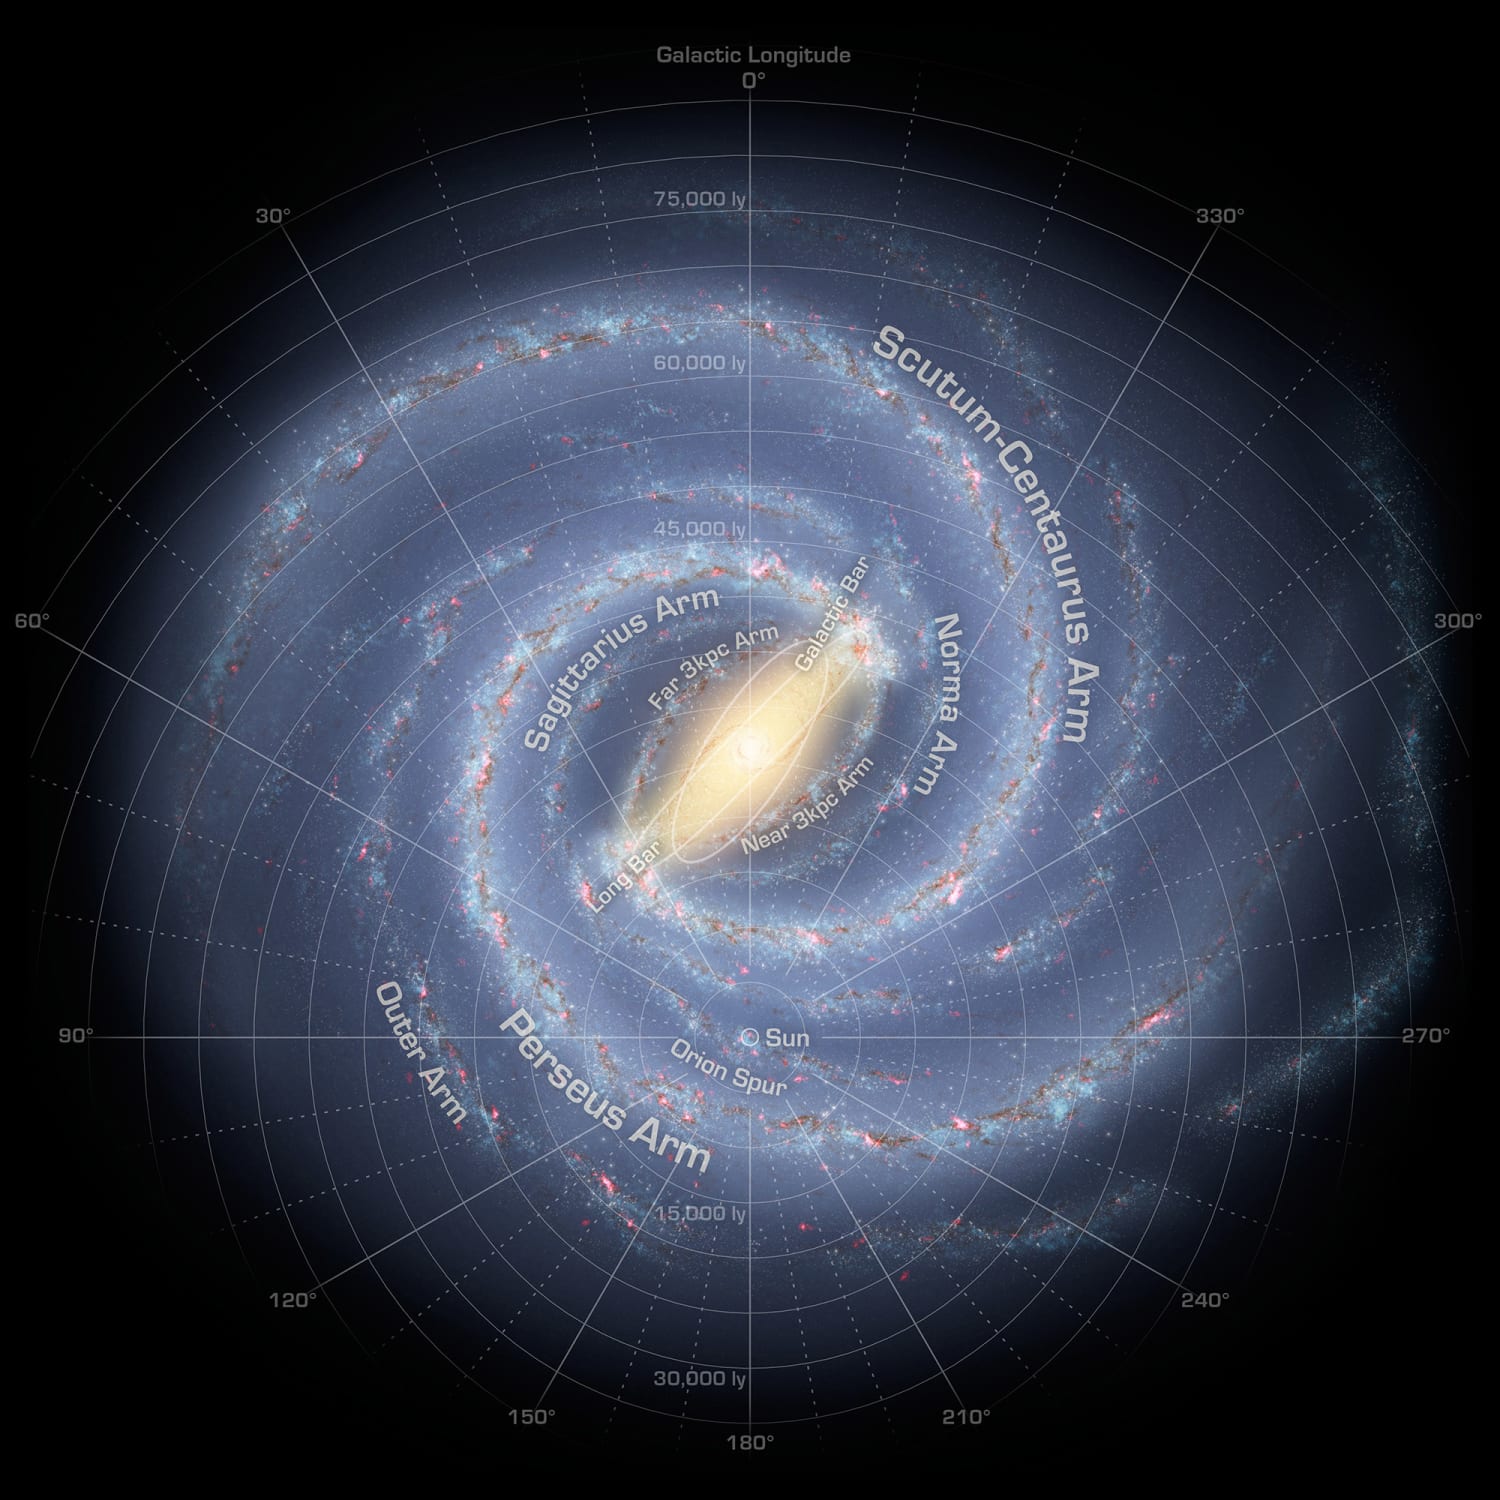 Where is the Sun located in the Milky Way?